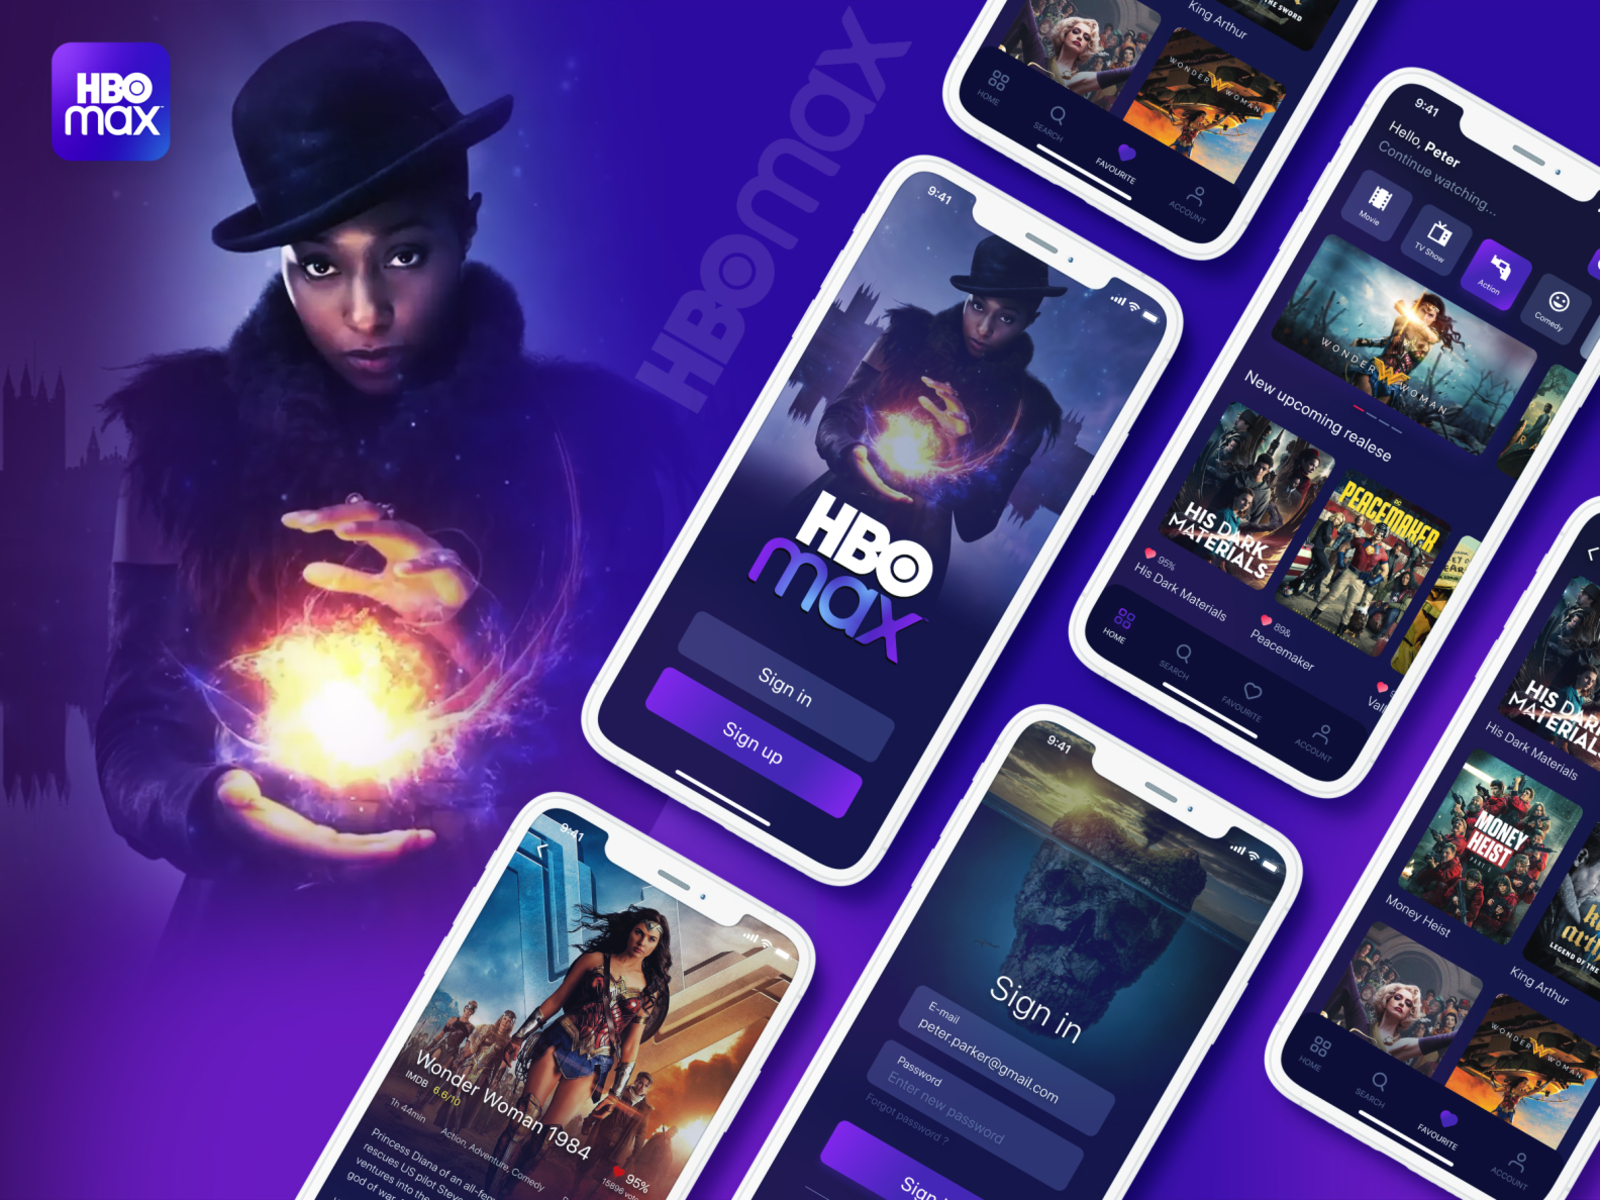 HBO Max Redesign - Uplabs Challenge by Sophia Miller for Bacancy on Dribbble